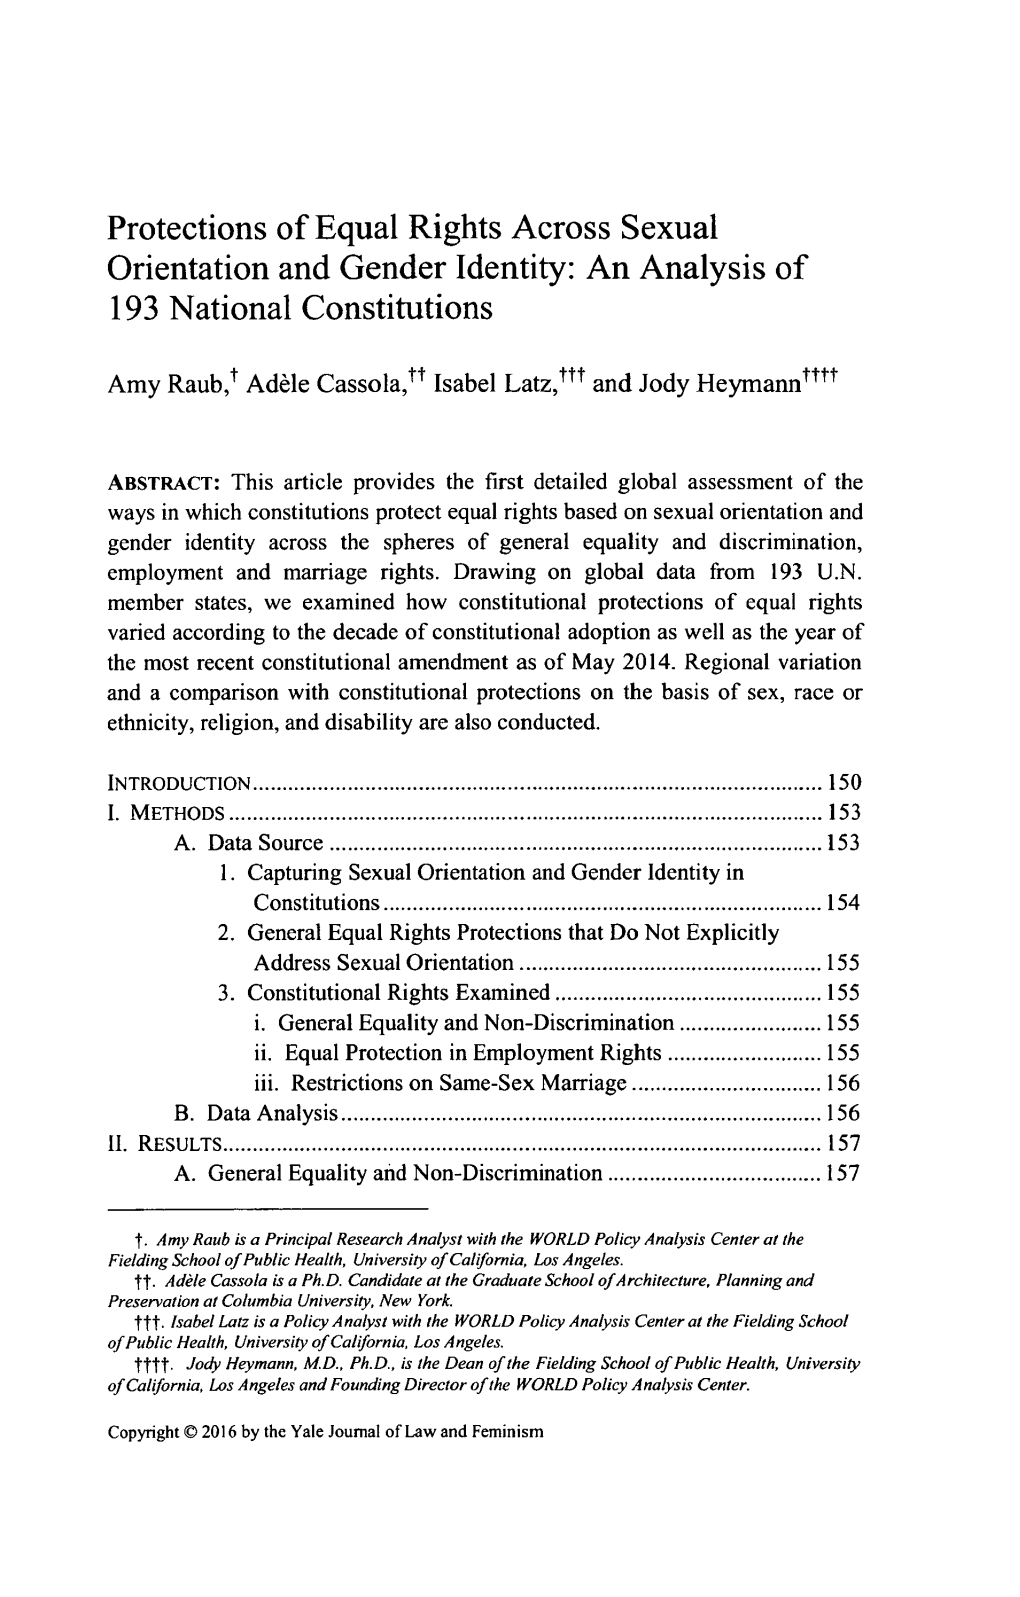 Protections of Equal Rights Across Sexual Orientation and Gender Identity: an Analysis of 193 National Constitutions